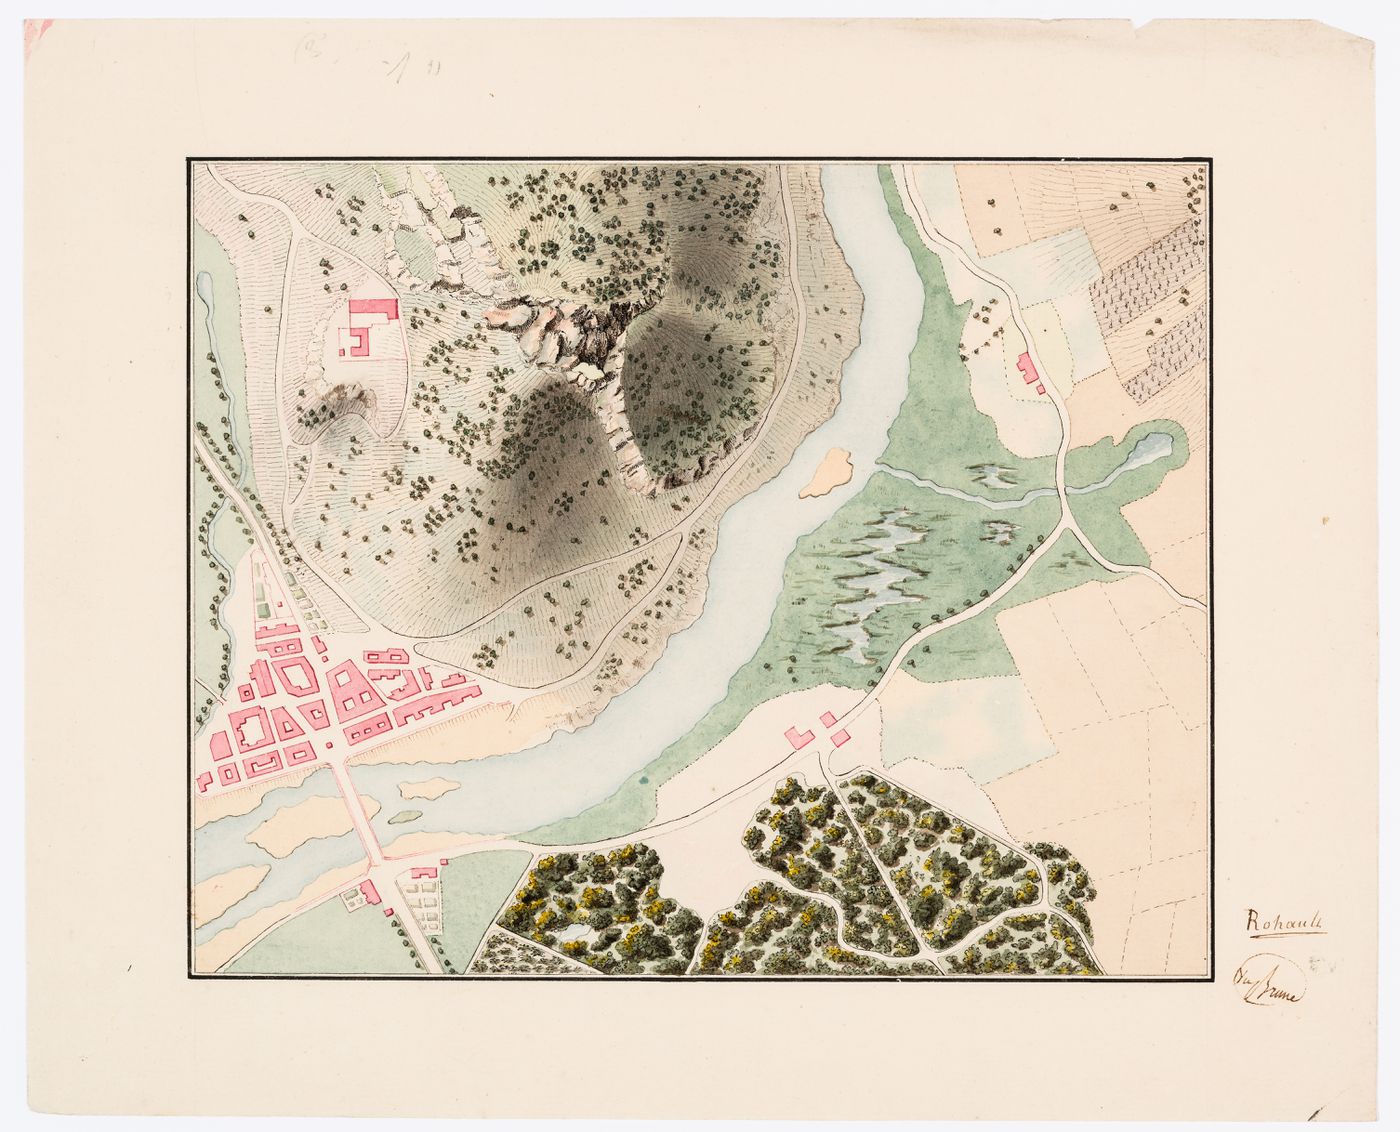 Plan of an unidentified town on a river including a bird's-eye view of the surrounding landscape